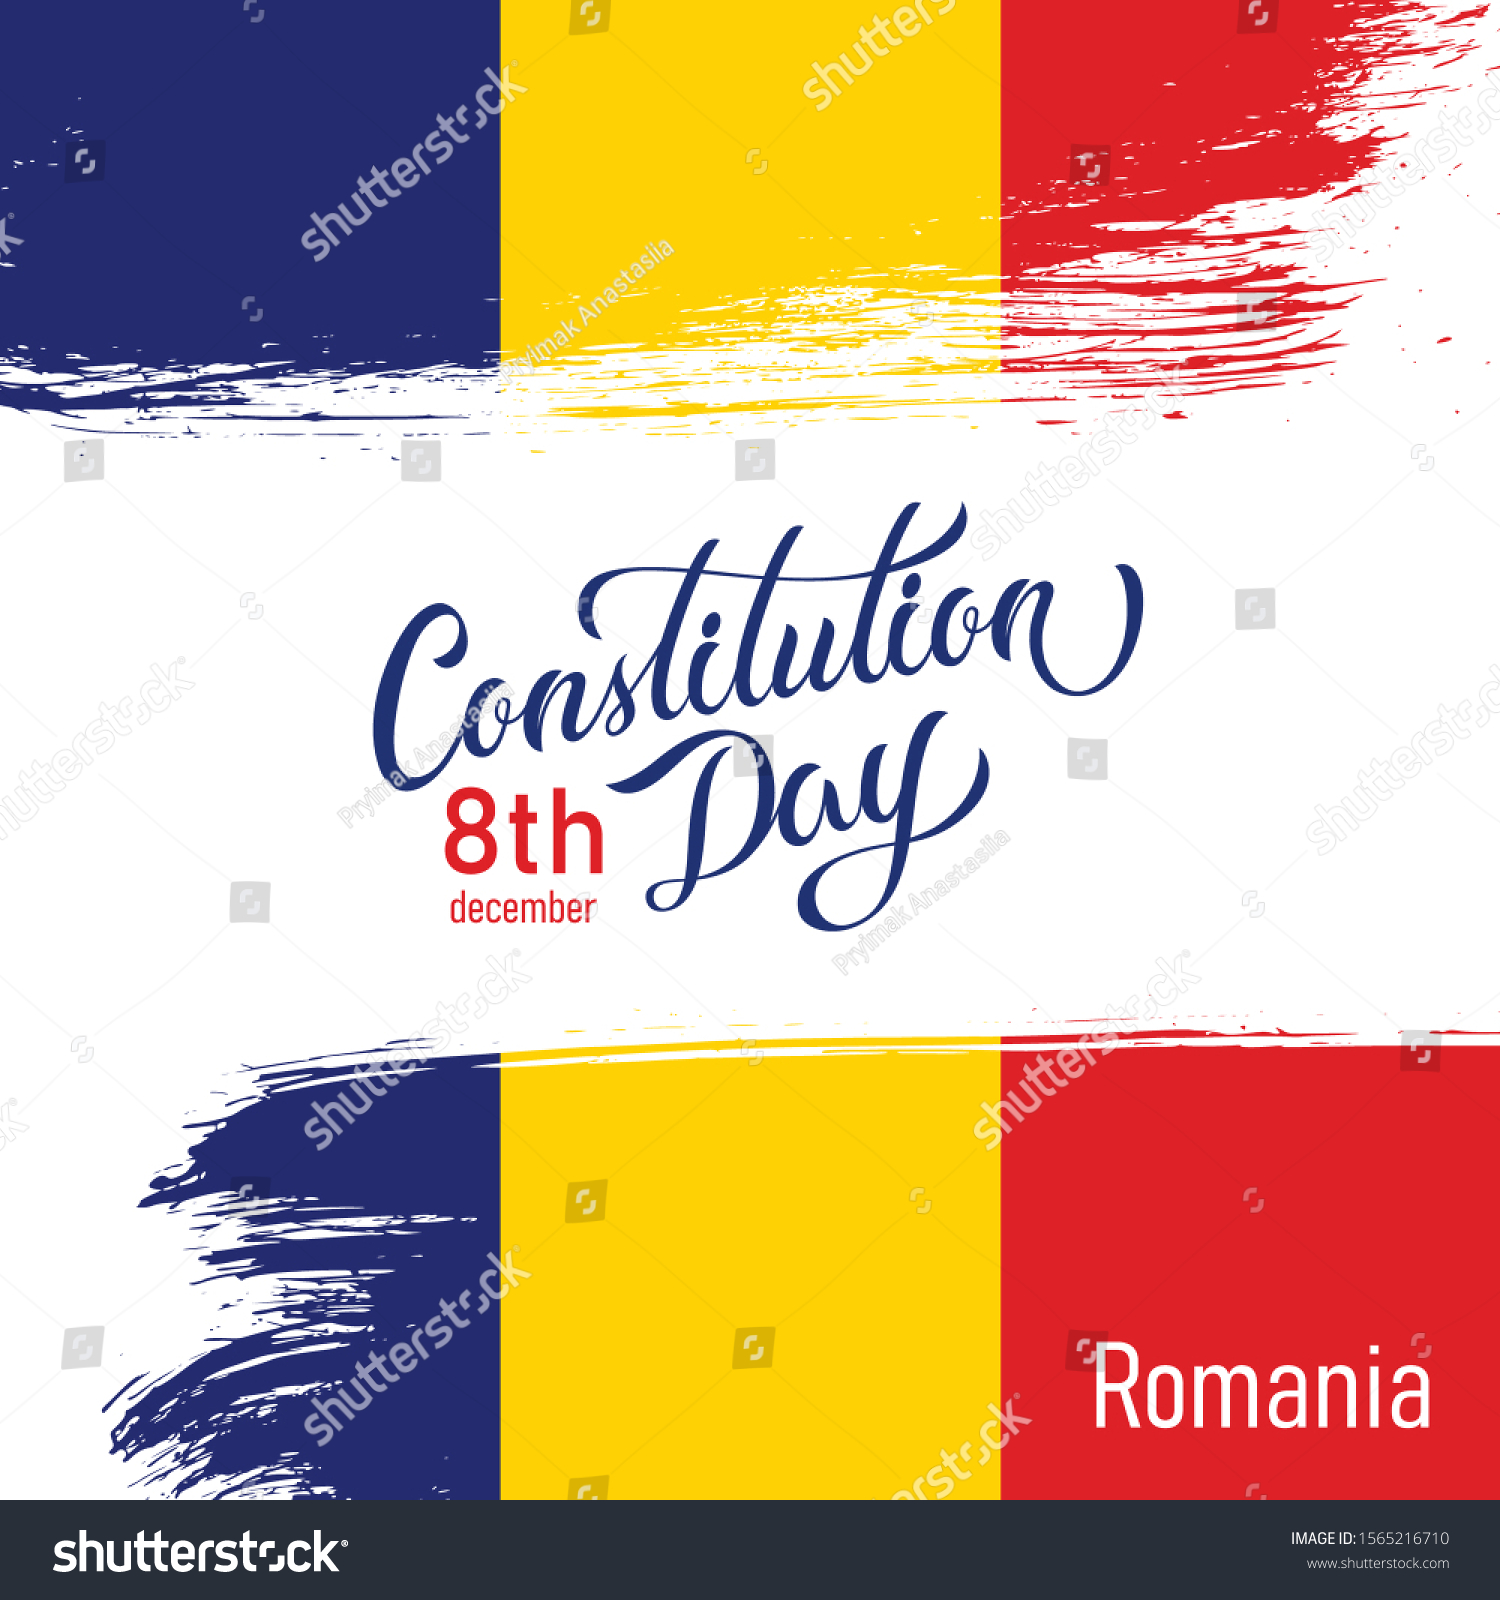 SVG of Happy Romania Constitution Day Vector Design Template Illustration svg